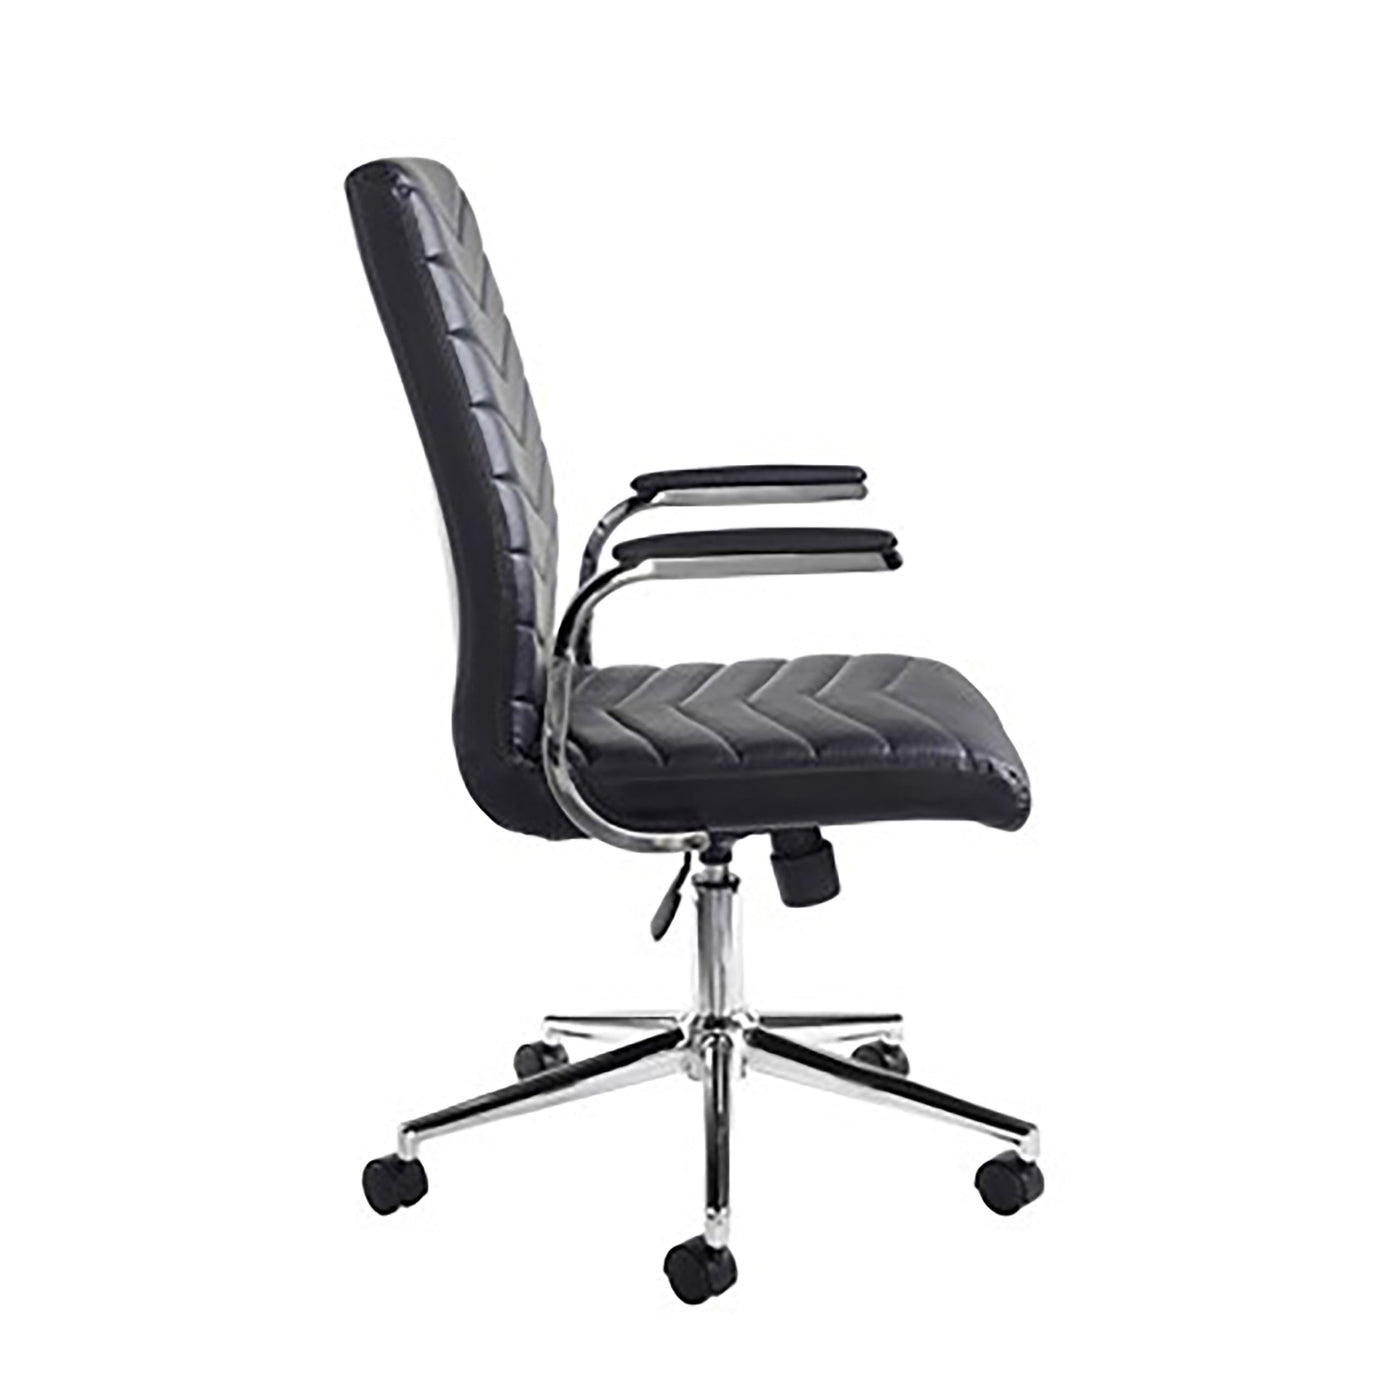 Martinez Home Office Chair | Home Office Furniture | Office Seating | Black Faux Leather Chair